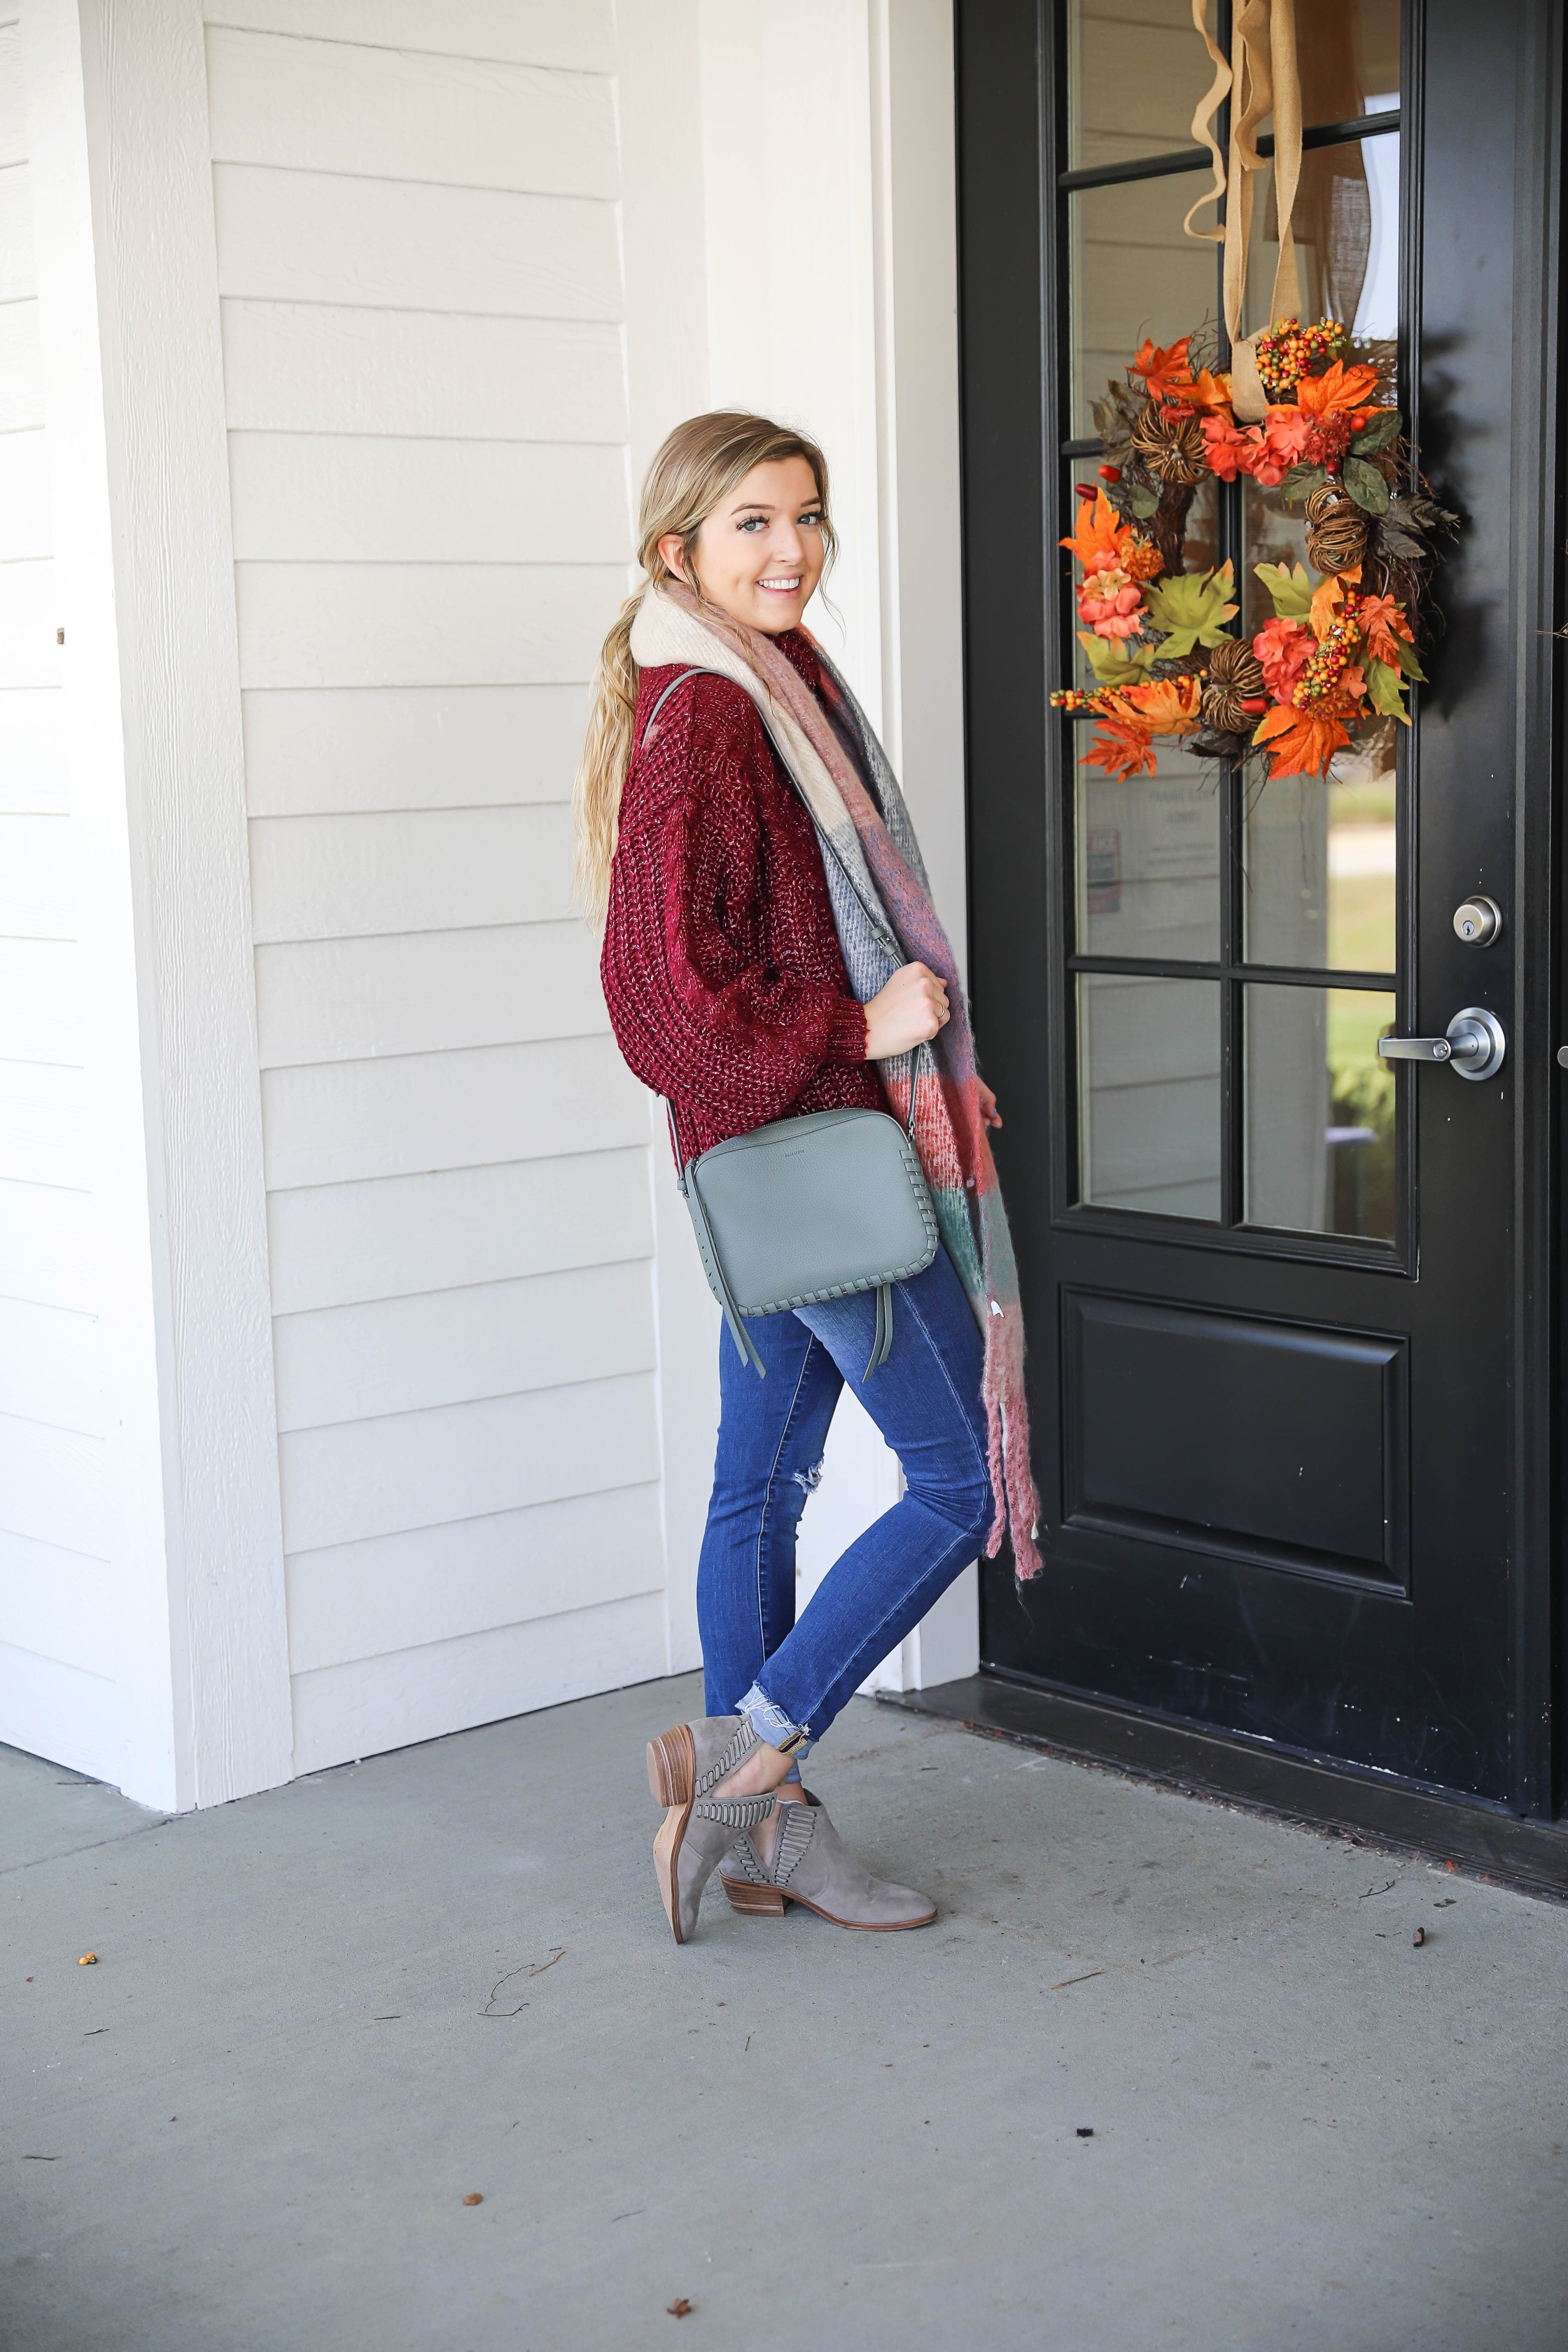 Burgundy knit sweater with the softest plaid oversized scarf! Paired with ripped denim jeans and my vince camuto booties! This is the perfect fall outfit you need in your closet! A few pieces are from Red Dress Boutique which is the best online store, especially for fall clothes! Details on fashion blog daily dose of charm by lauren lindmark